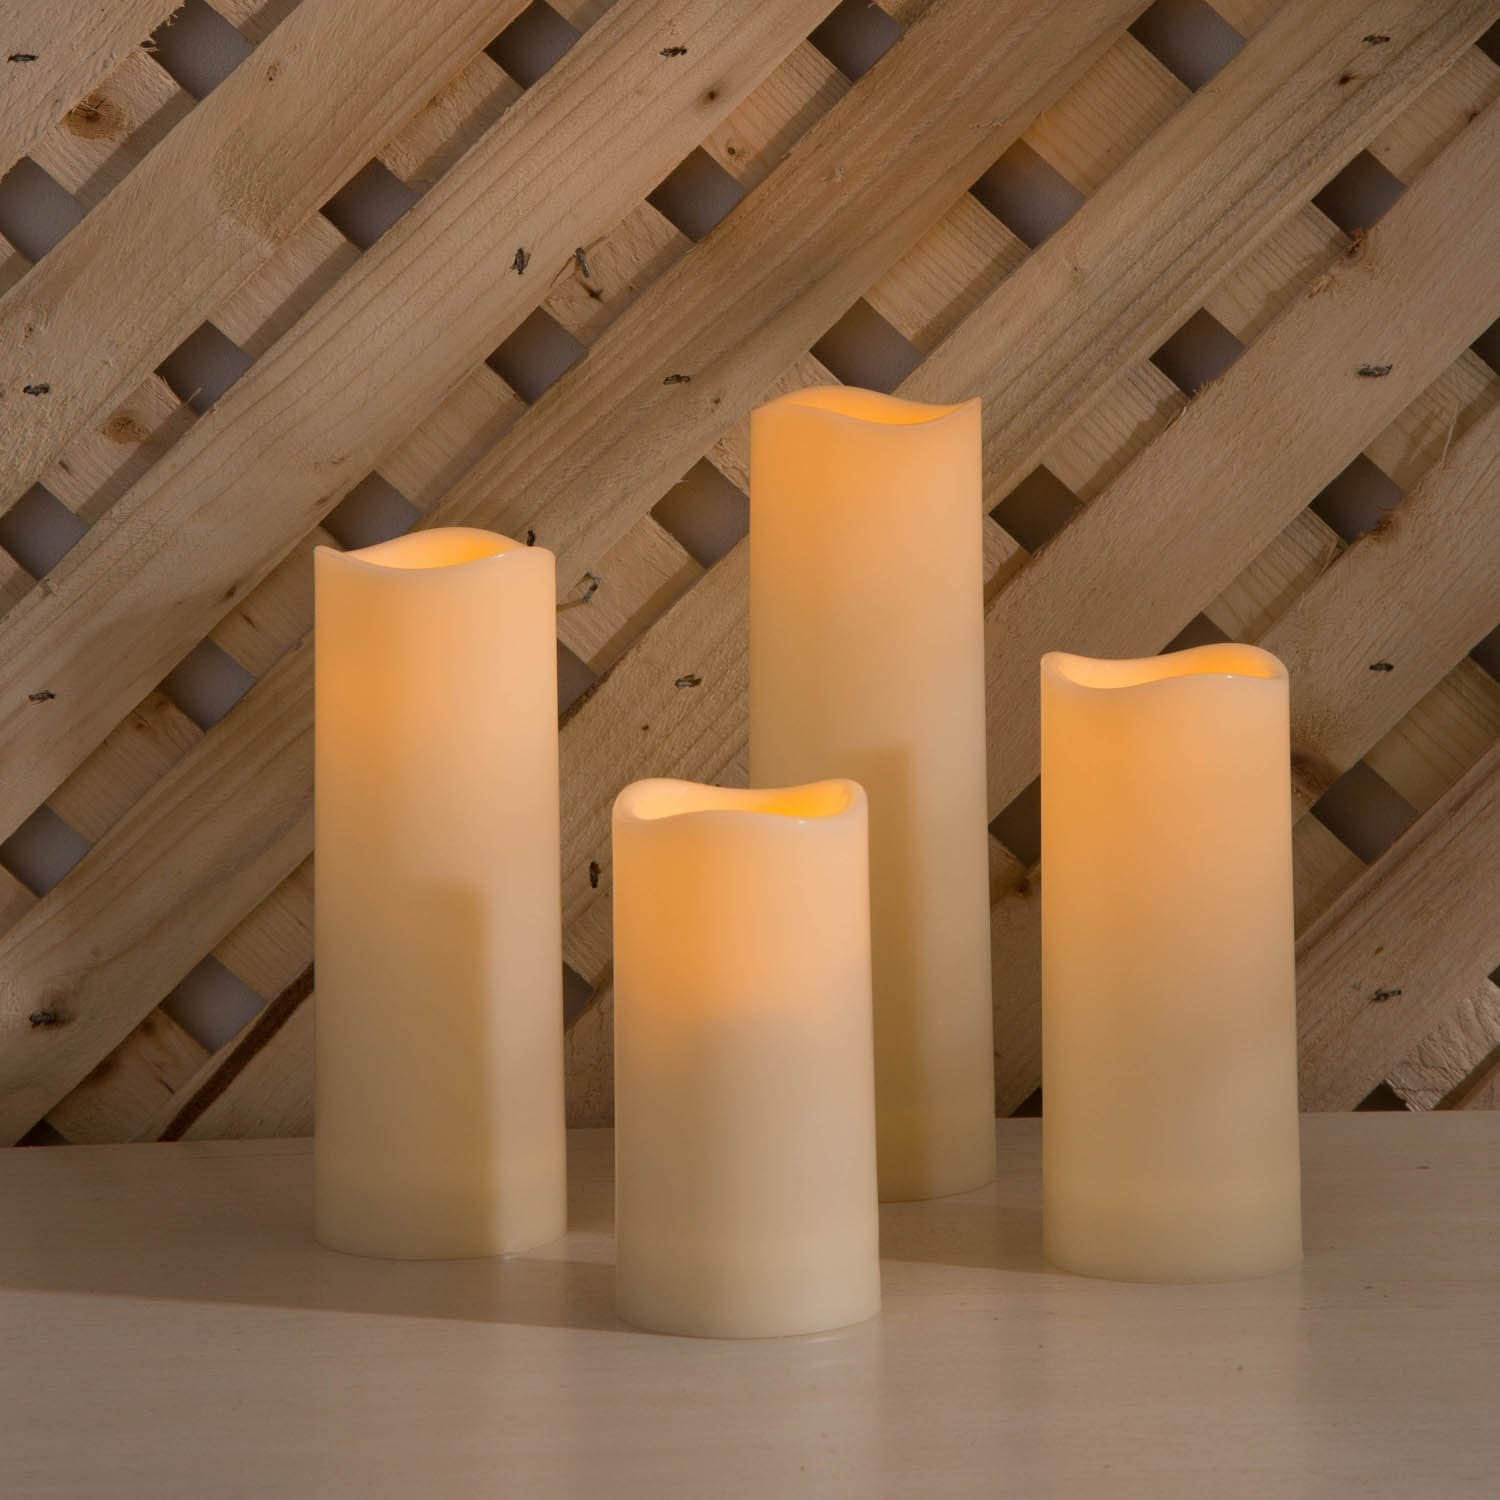 Flameless LED Candles with 4/8Hours Timer Function Church/Votive/Hurricane Lamp/Lantern/Tealight Candles Indoor Outdoor Flickering Battery Operated Electronic Plastic Pillar Candle Ivory Color 4 